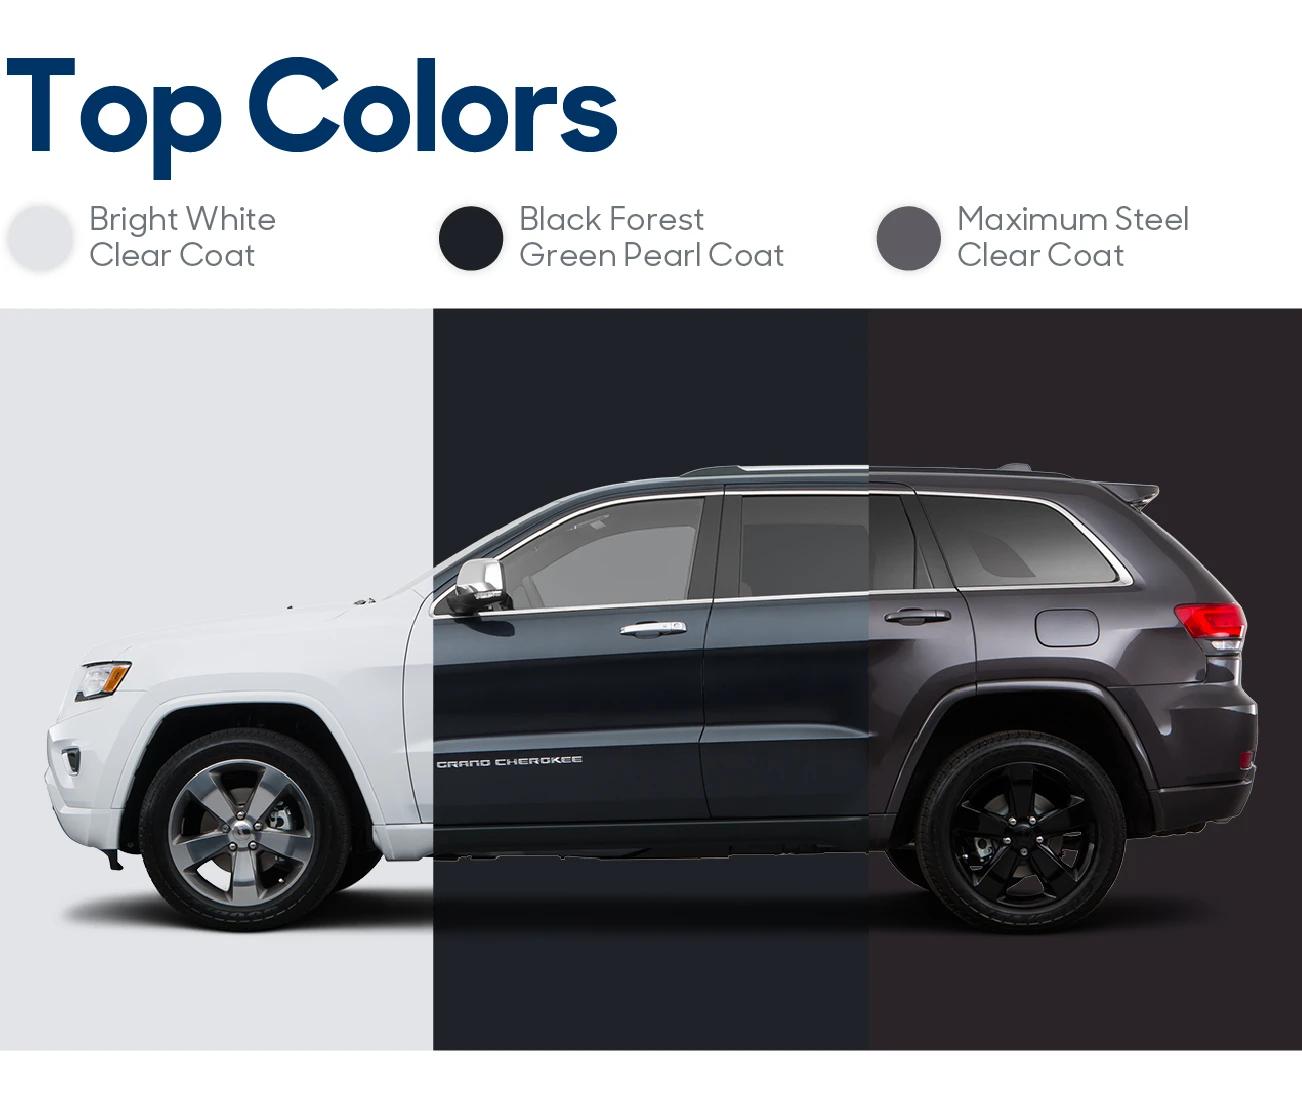 2015 Jeep Grand Cherokee: Reviews, Photos, and More: Color Options | CarMax